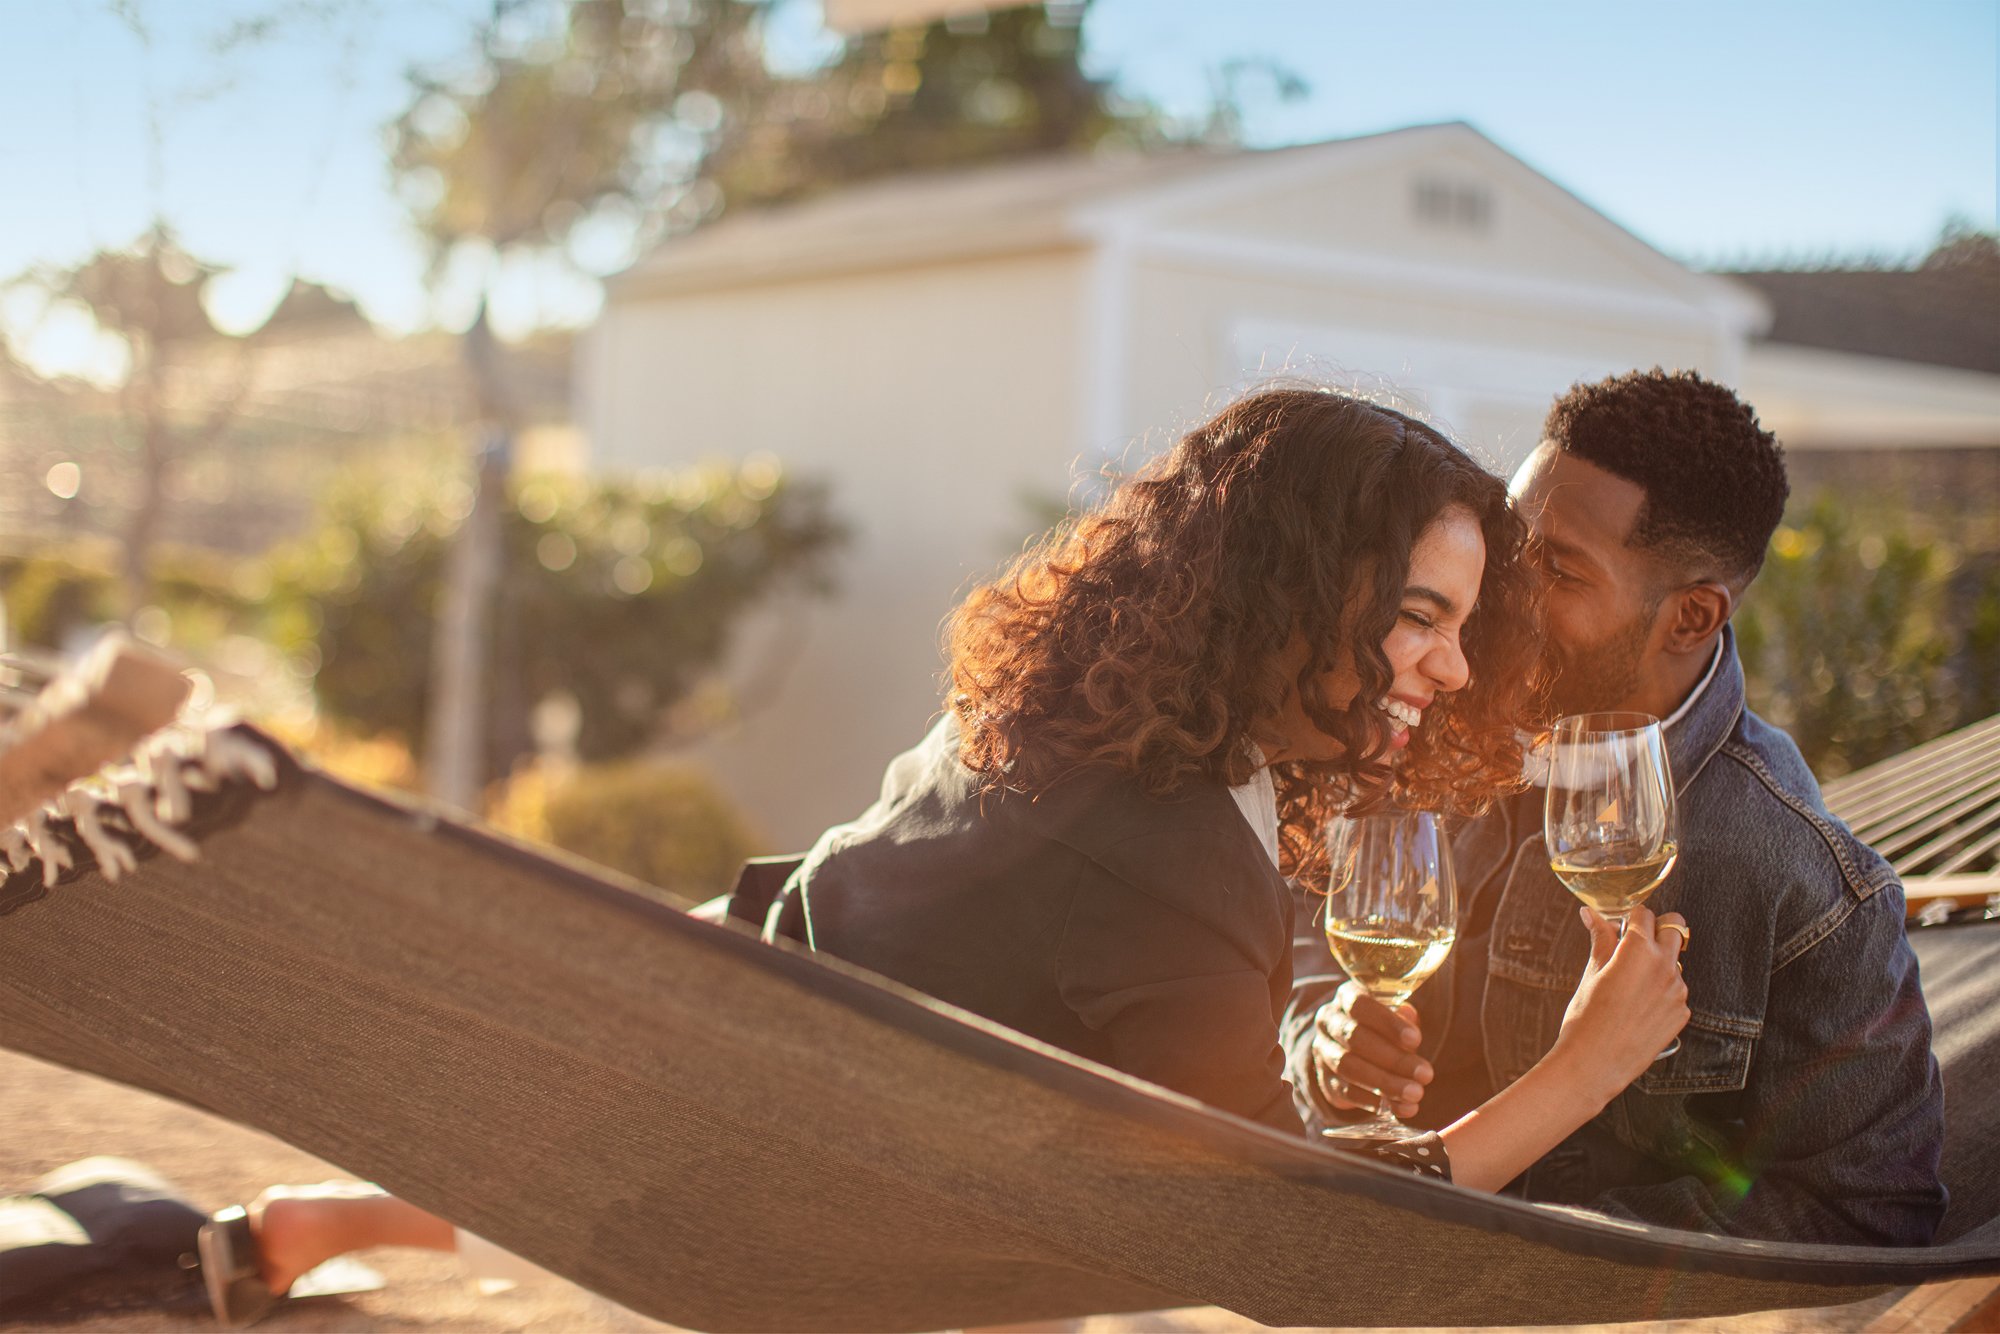 A woman, holding a glass of white wine and laughing, sits in a hammock with a man who whispers in her ear.